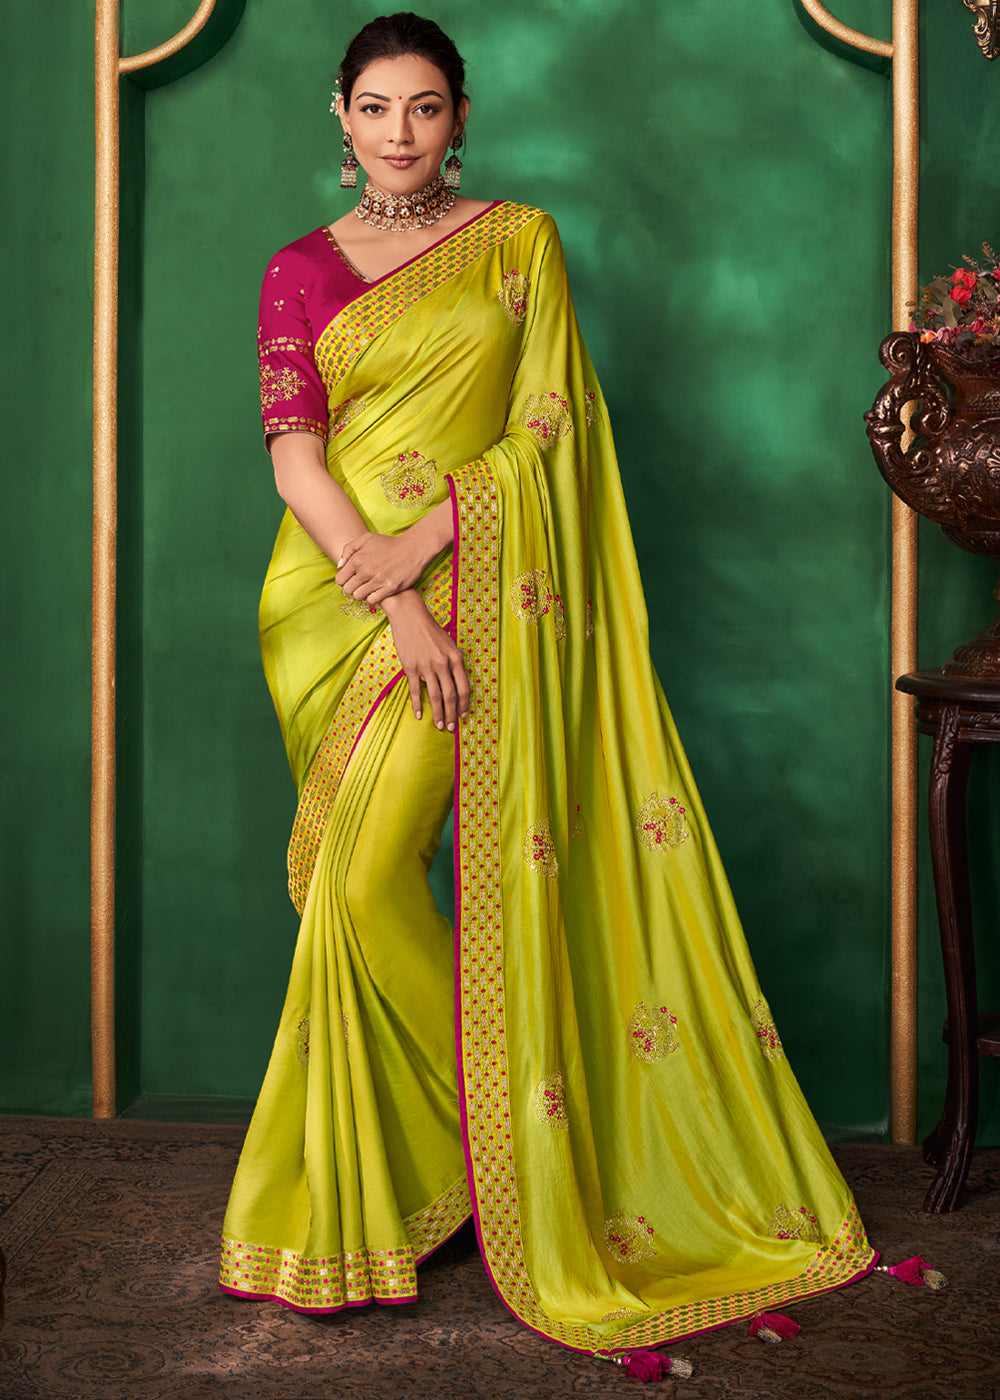 BUY LEMON COLOUR ROYAL SILK KANCHIPURAM STYLE BEST QUALITY SAREE AT  AFFORDABLE RATE FROM FAB FUNDA